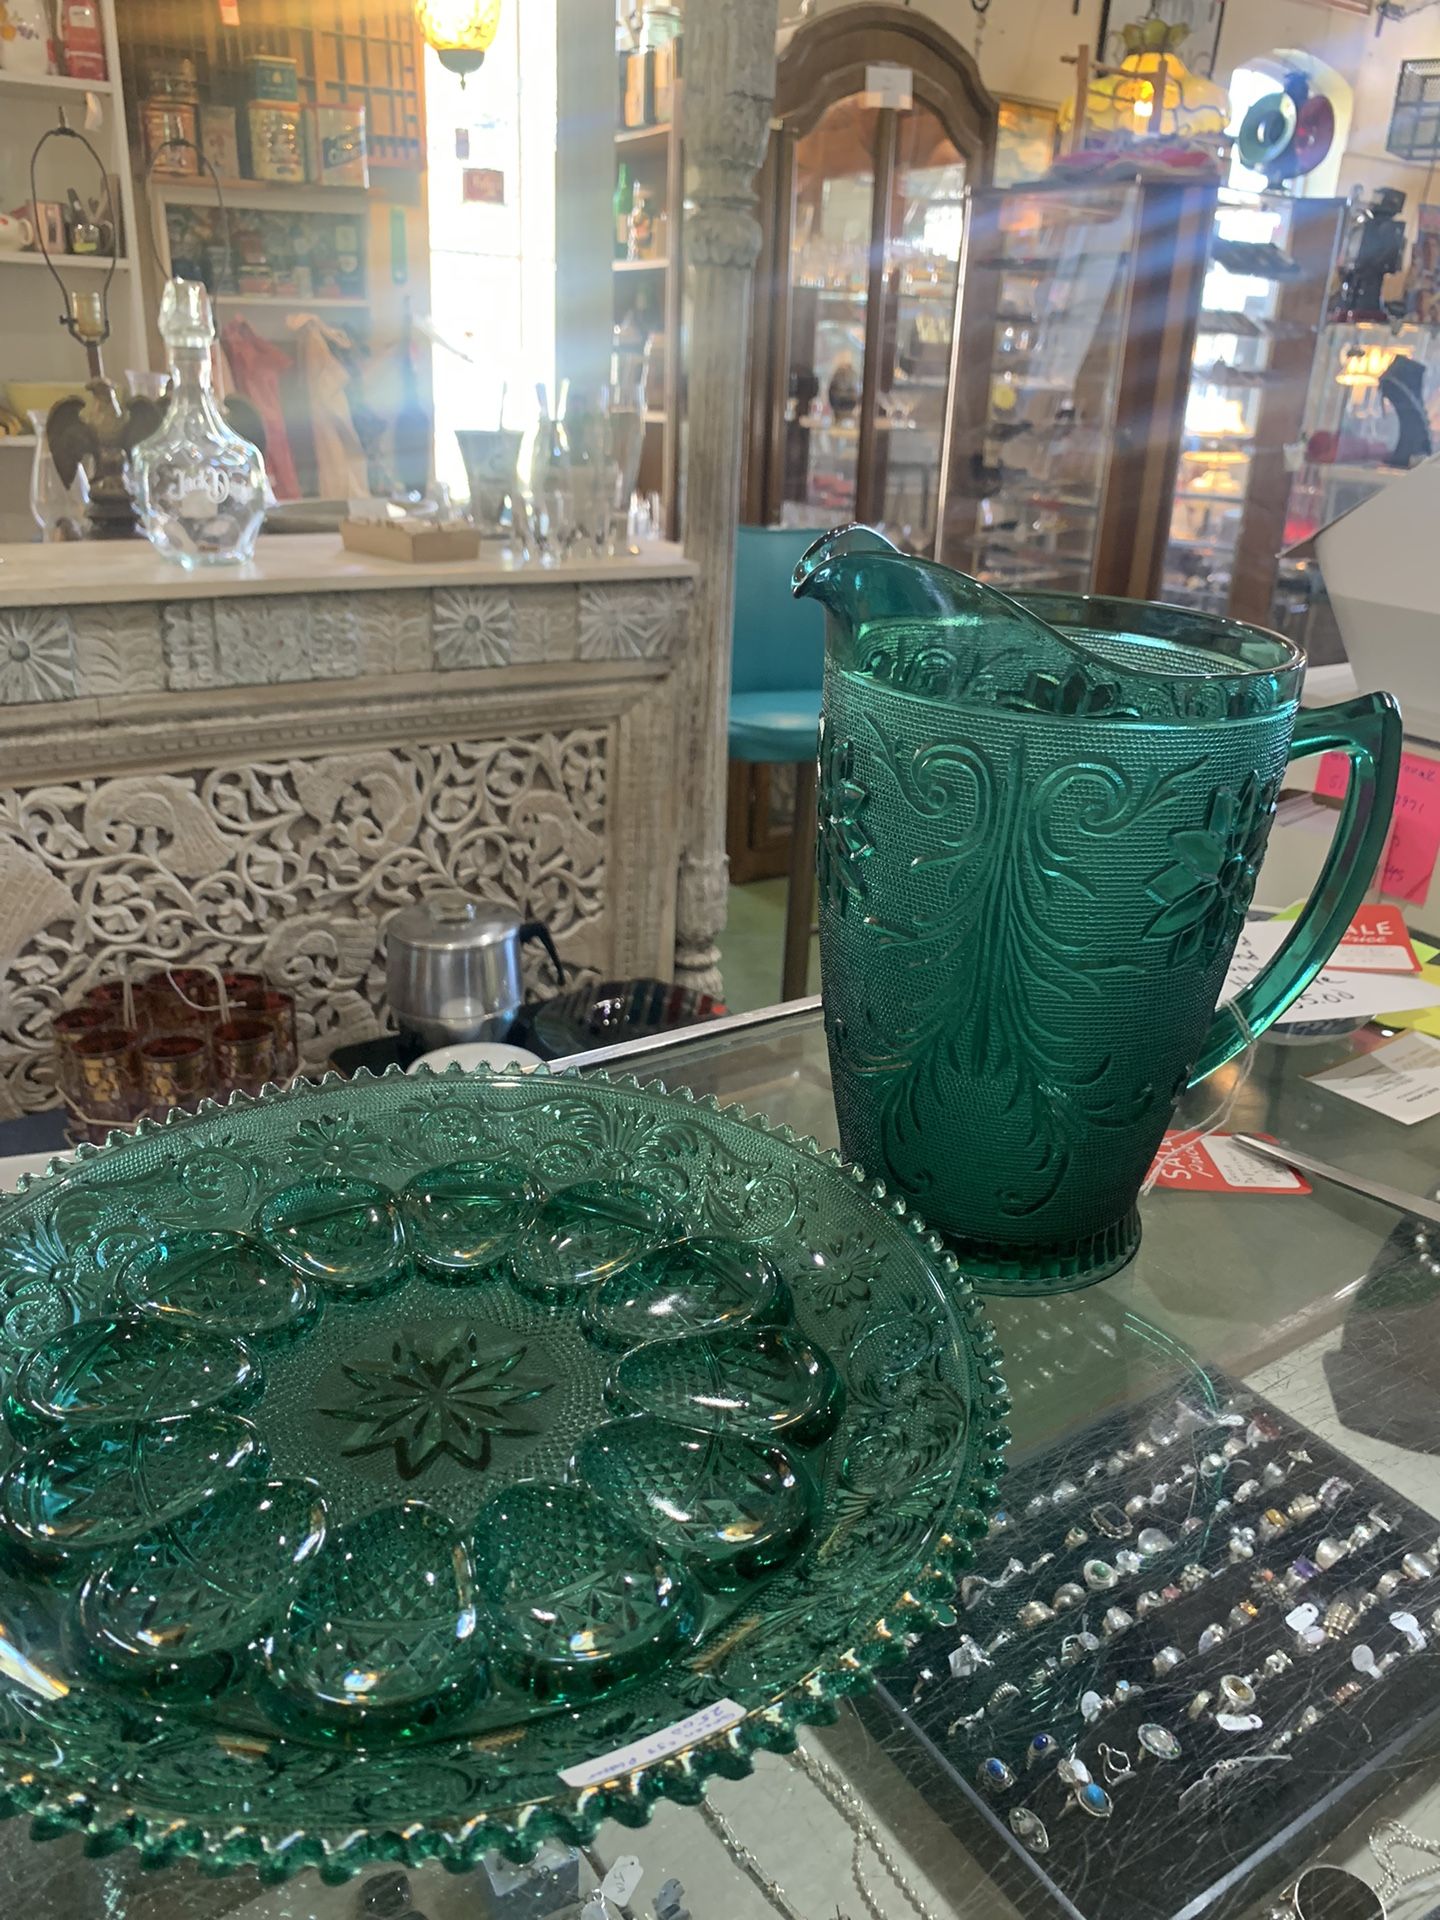 9x10 forest green depression glass pitcher 35.00. 12x12 forest green matching deviled egg platter  25.00.  Johanna at Antiques and More. Located at 31